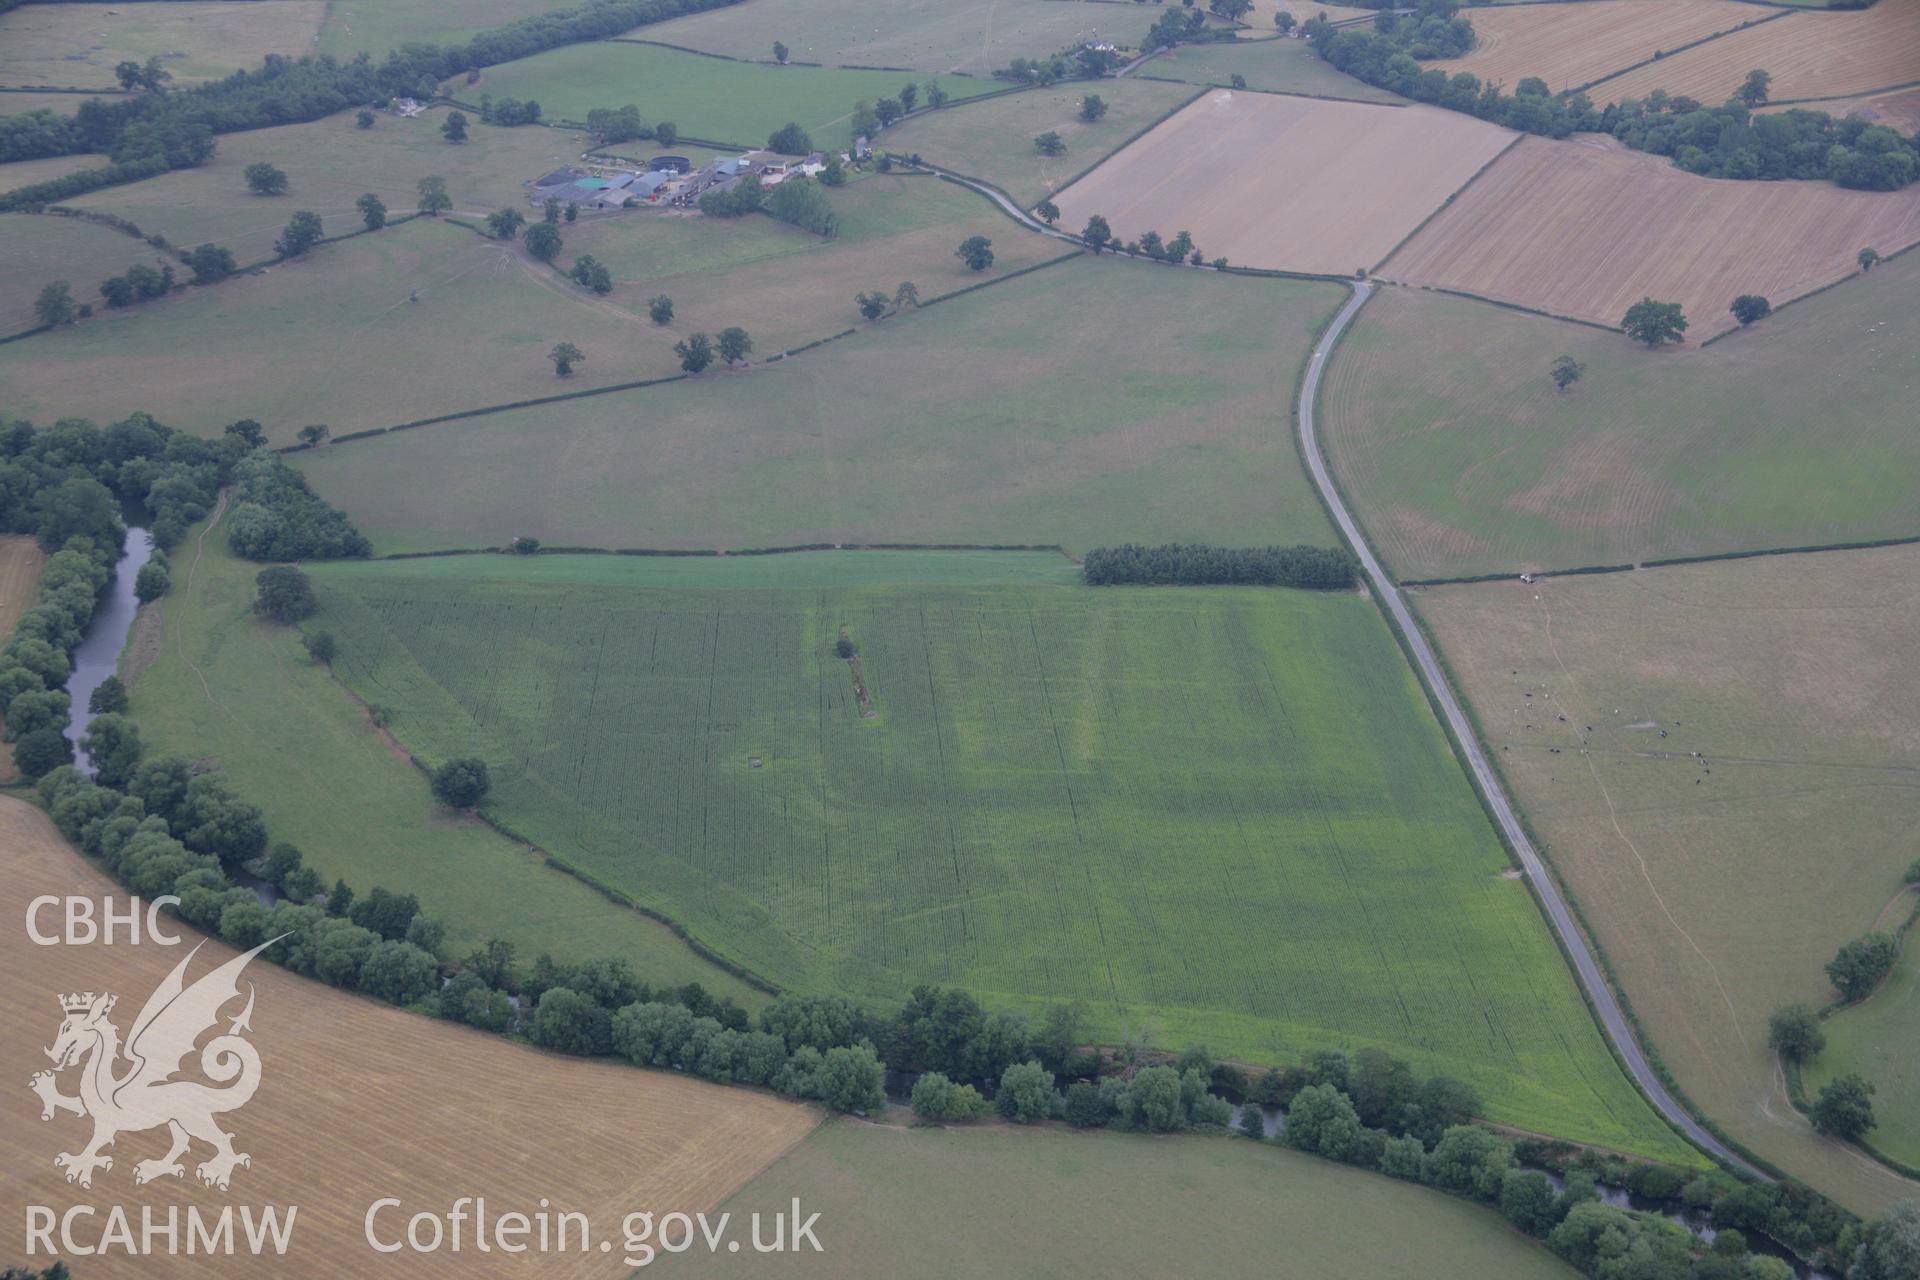 RCAHMW colour oblique aerial photograph of Forden Gaer Roman Settlement showing cropmarks. Taken on 14 August 2006 by Toby Driver.